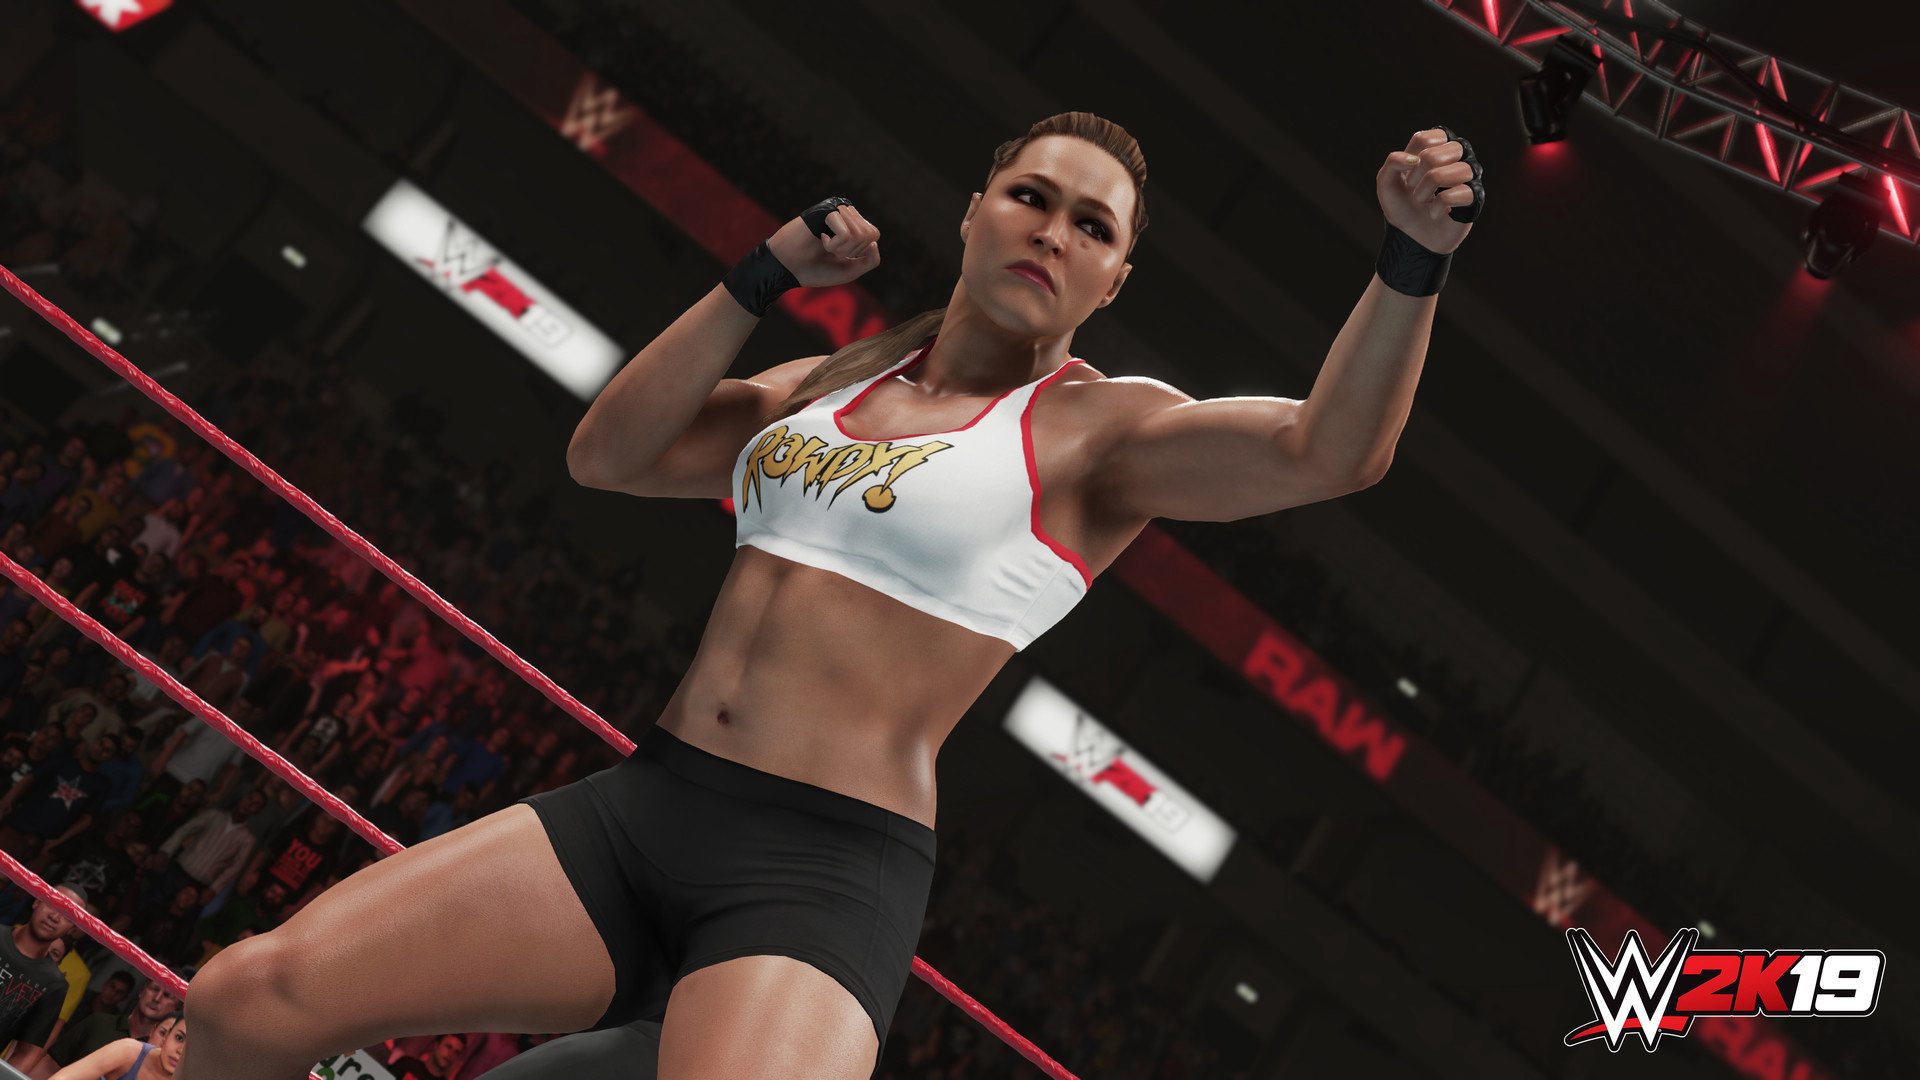 [$ 15.81] WWE 2K19 PlayStation 4 Account pixelpuffin.net Activation Link